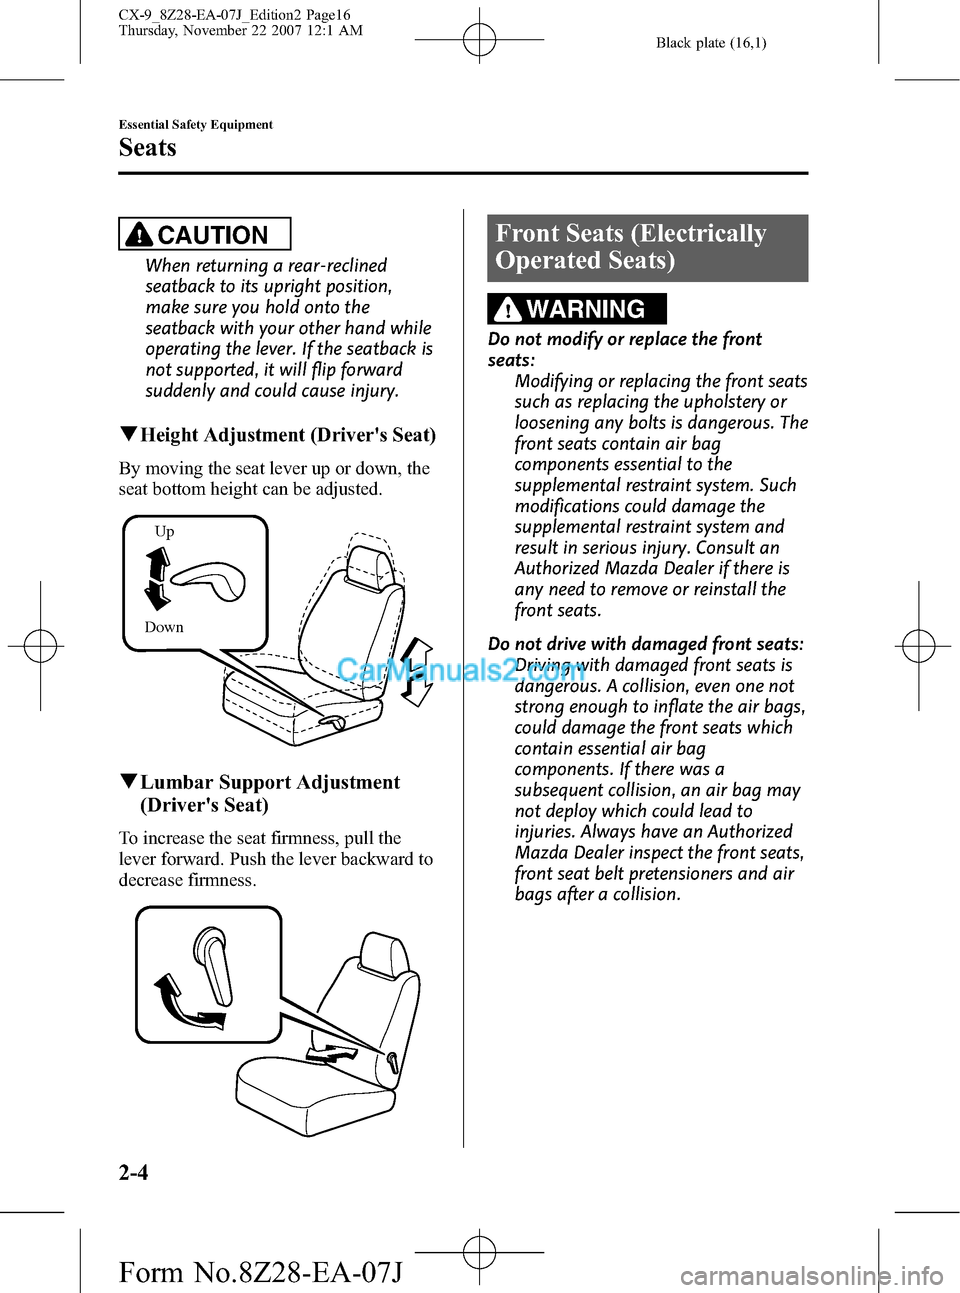 MAZDA MODEL CX-9 2008  Owners Manual (in English) Black plate (16,1)
CAUTION
When returning a rear-reclined
seatback to its upright position,
make sure you hold onto the
seatback with your other hand while
operating the lever. If the seatback is
not 